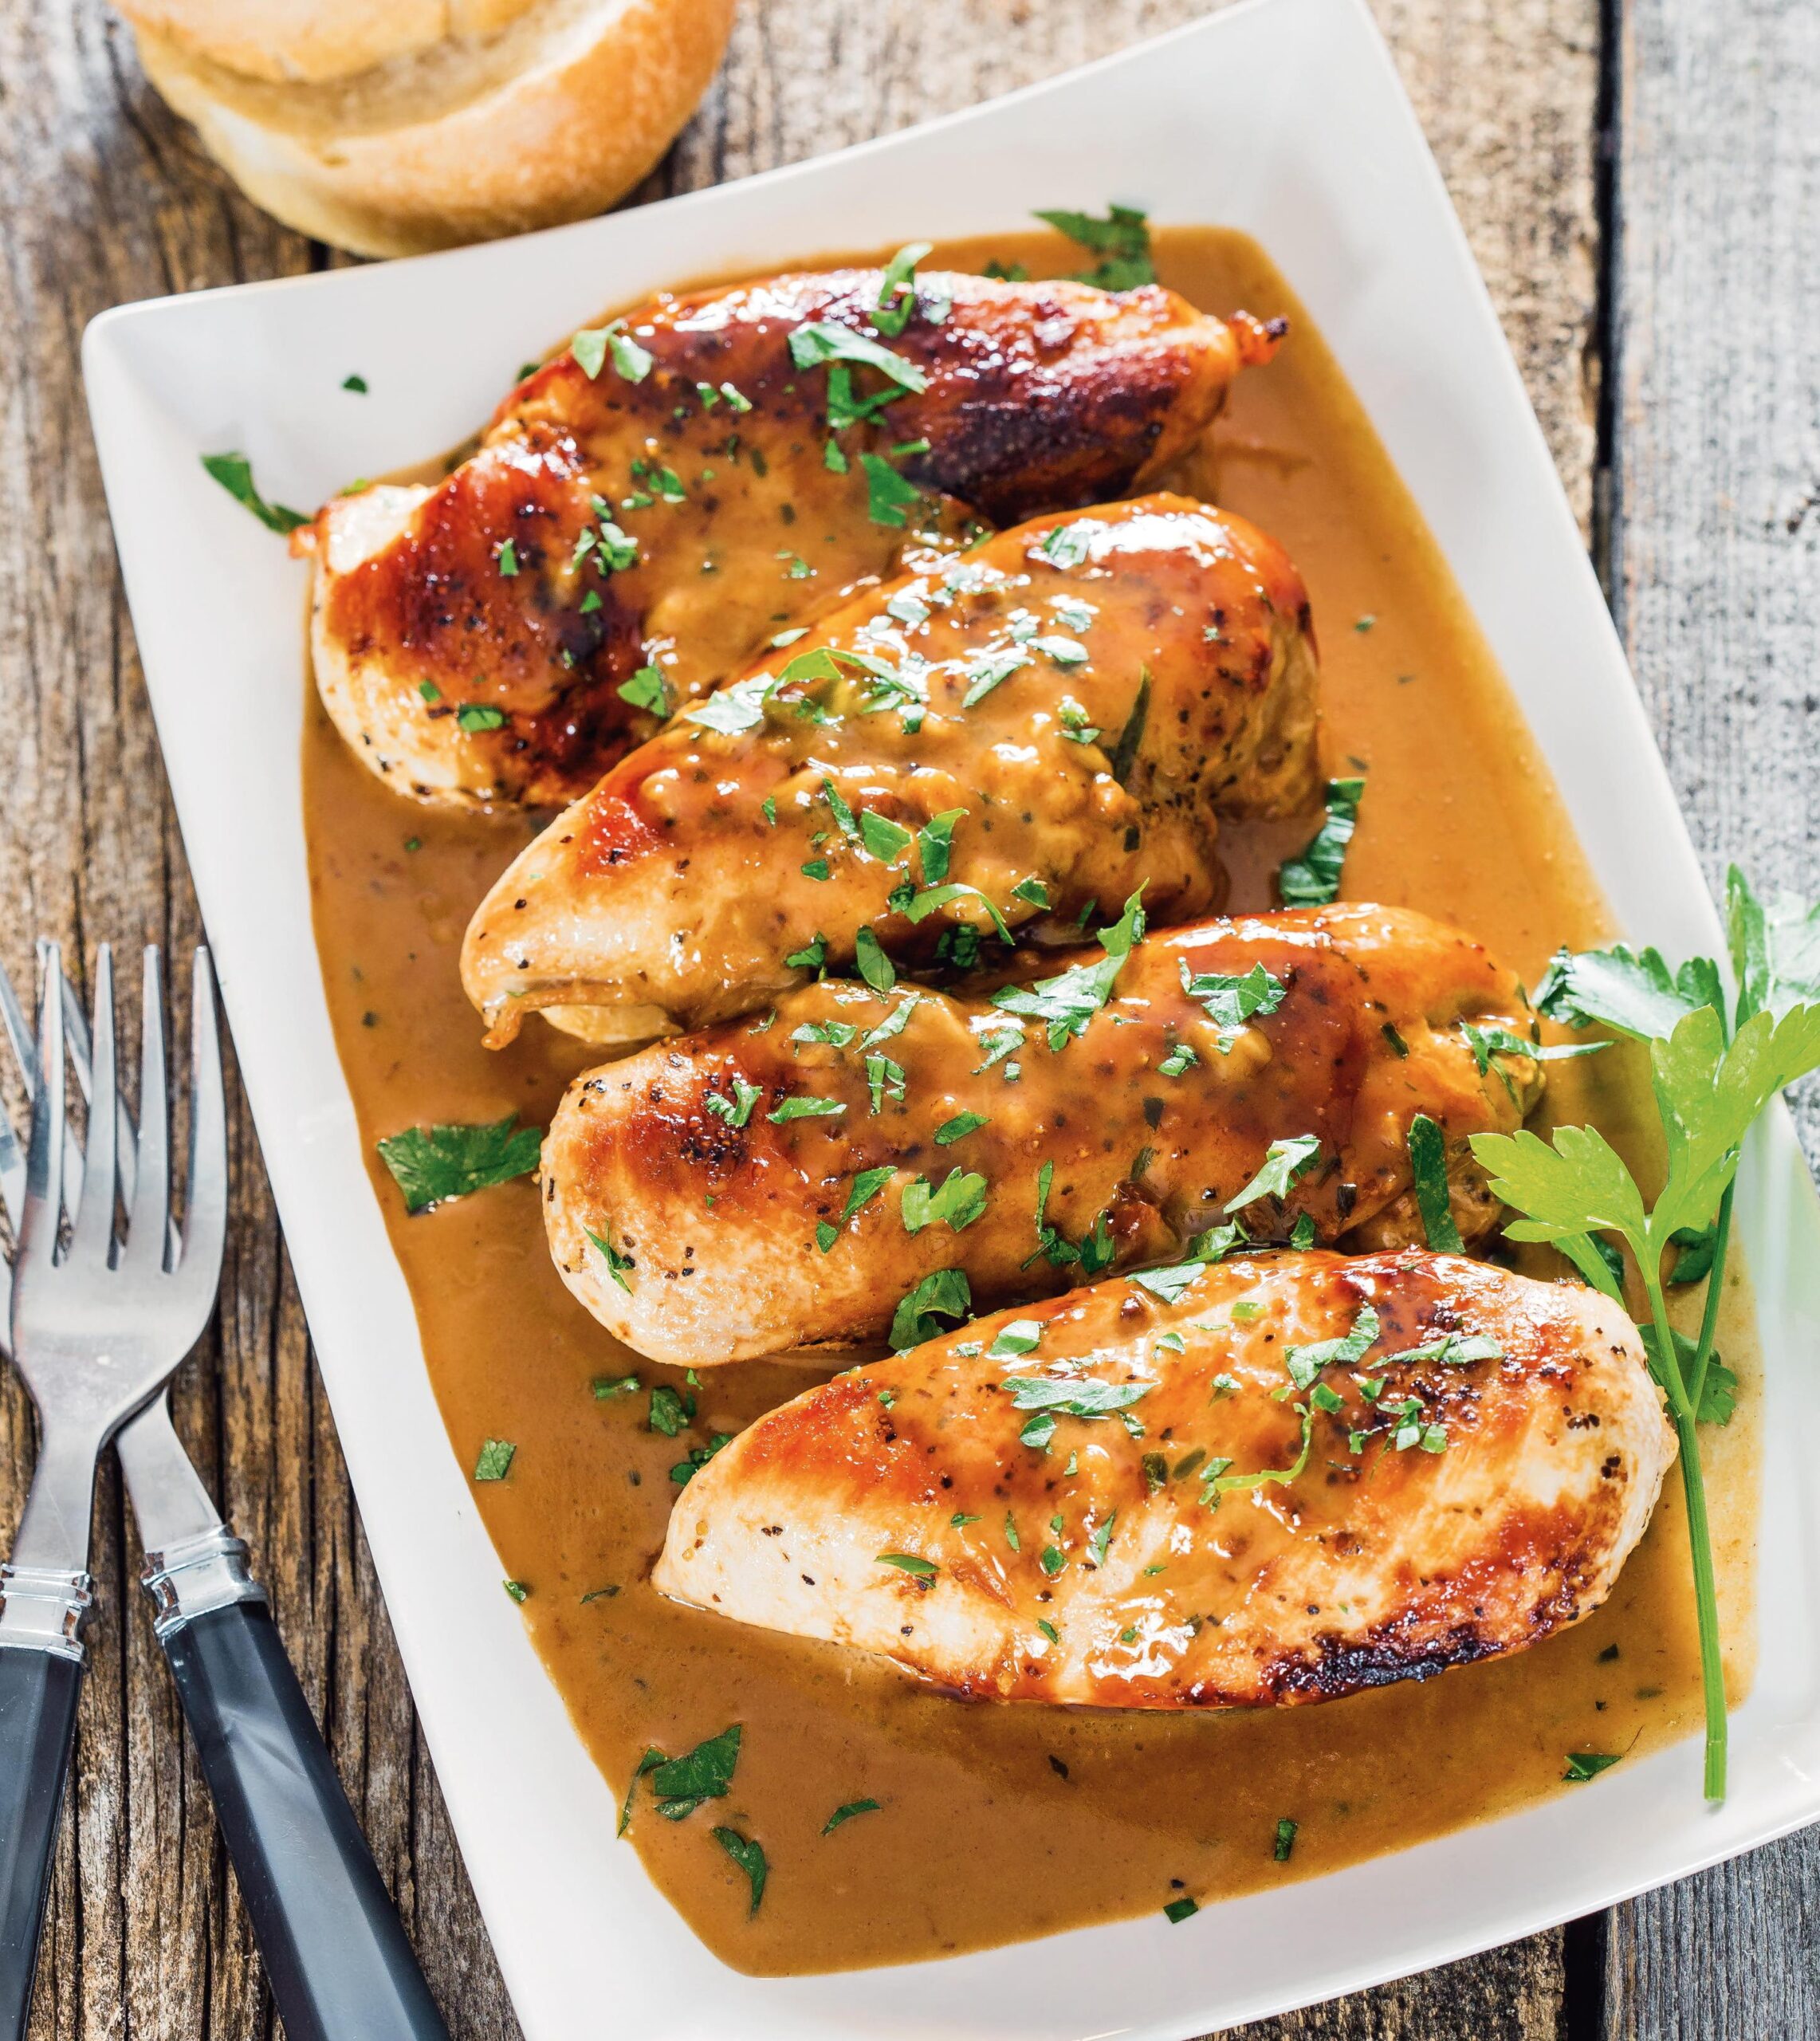 Indulge in tantalizing New Orleans chicken recipe today!